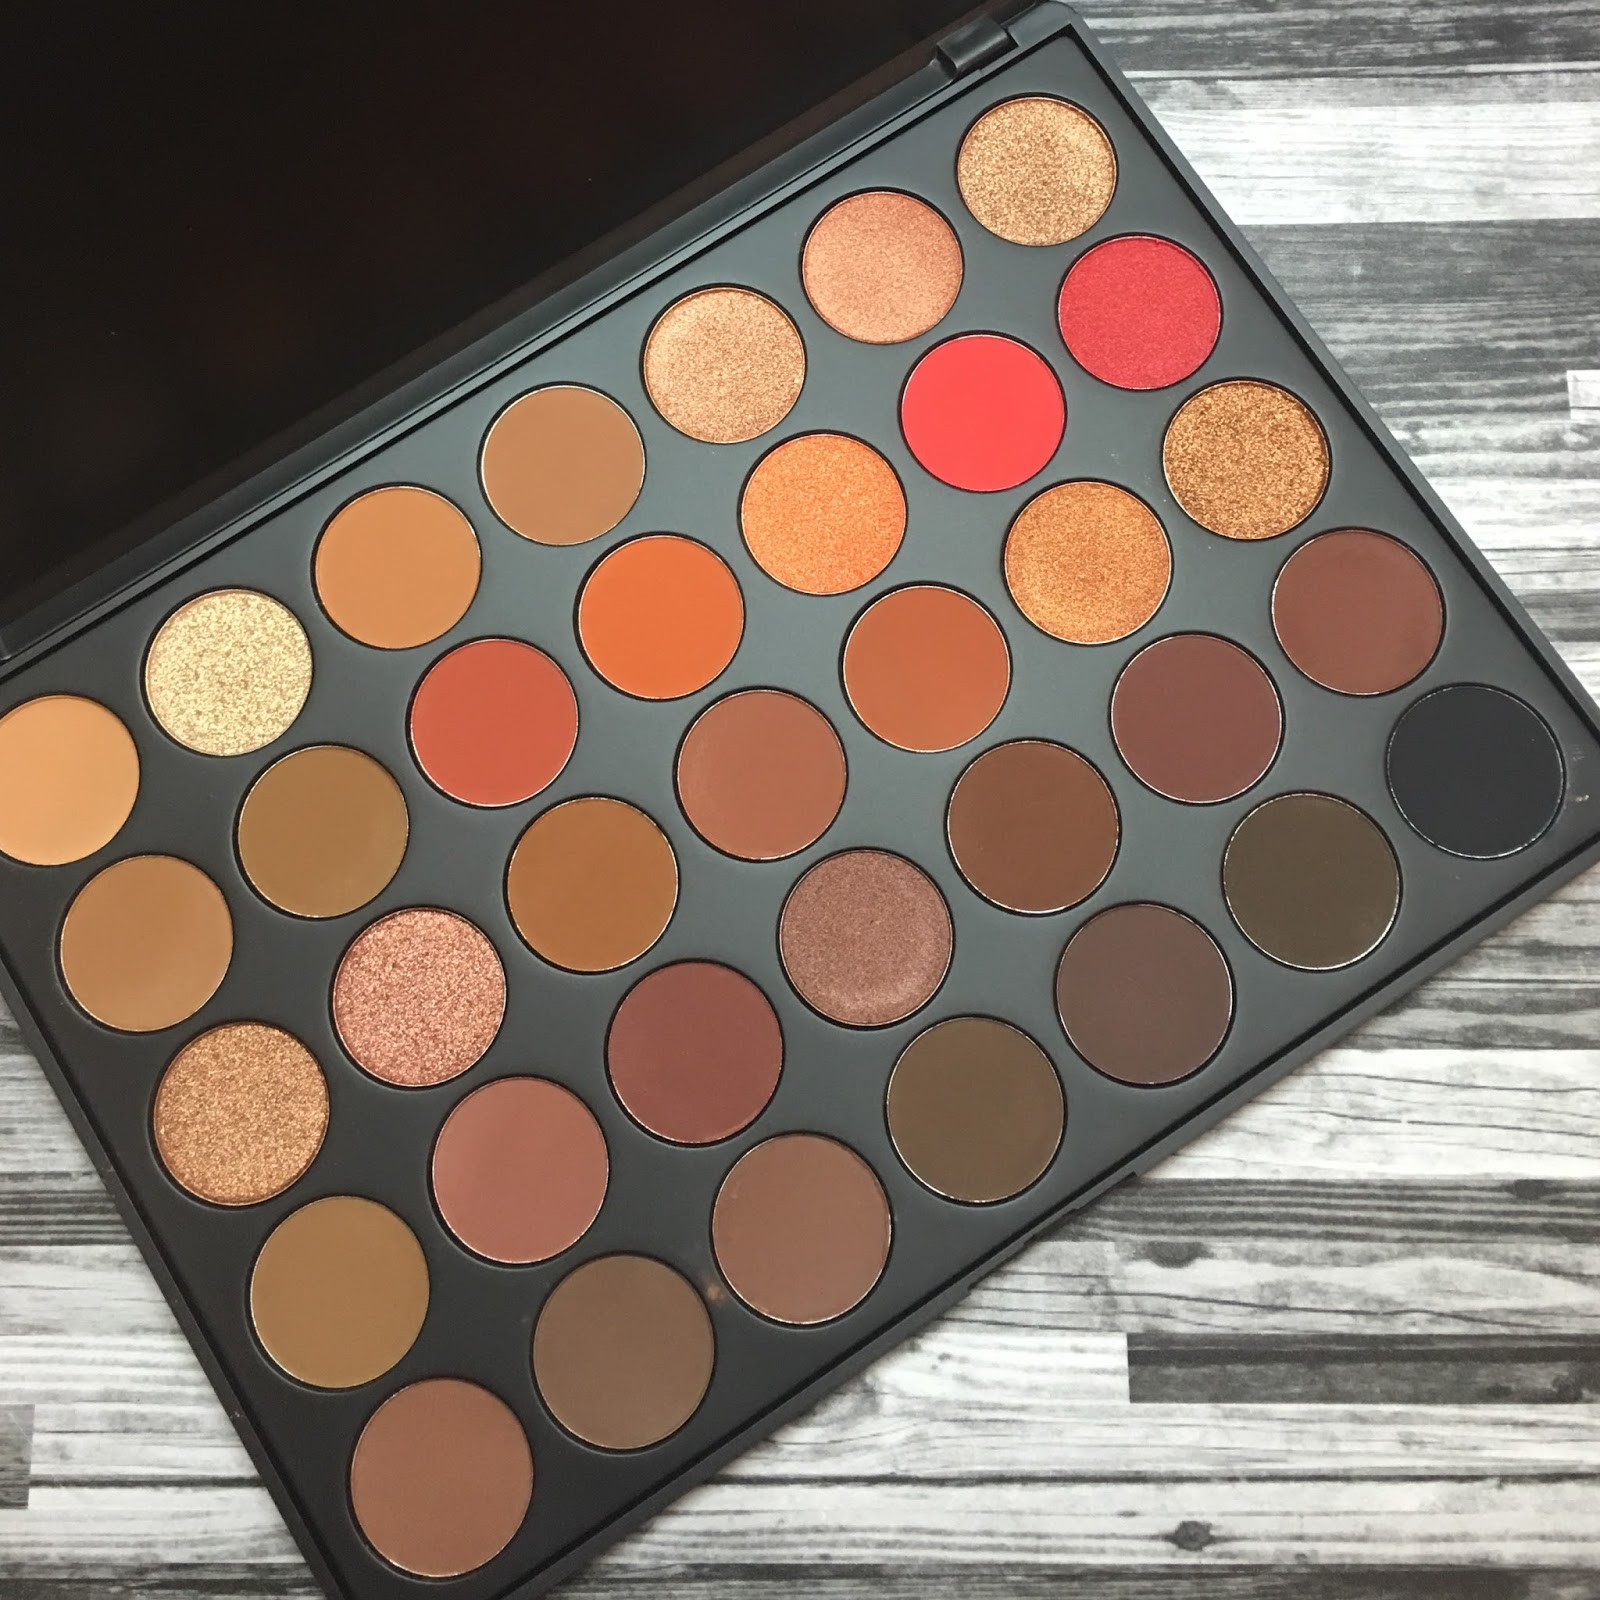 Morphe 350 2 Second Nature Palette Review and Swatches